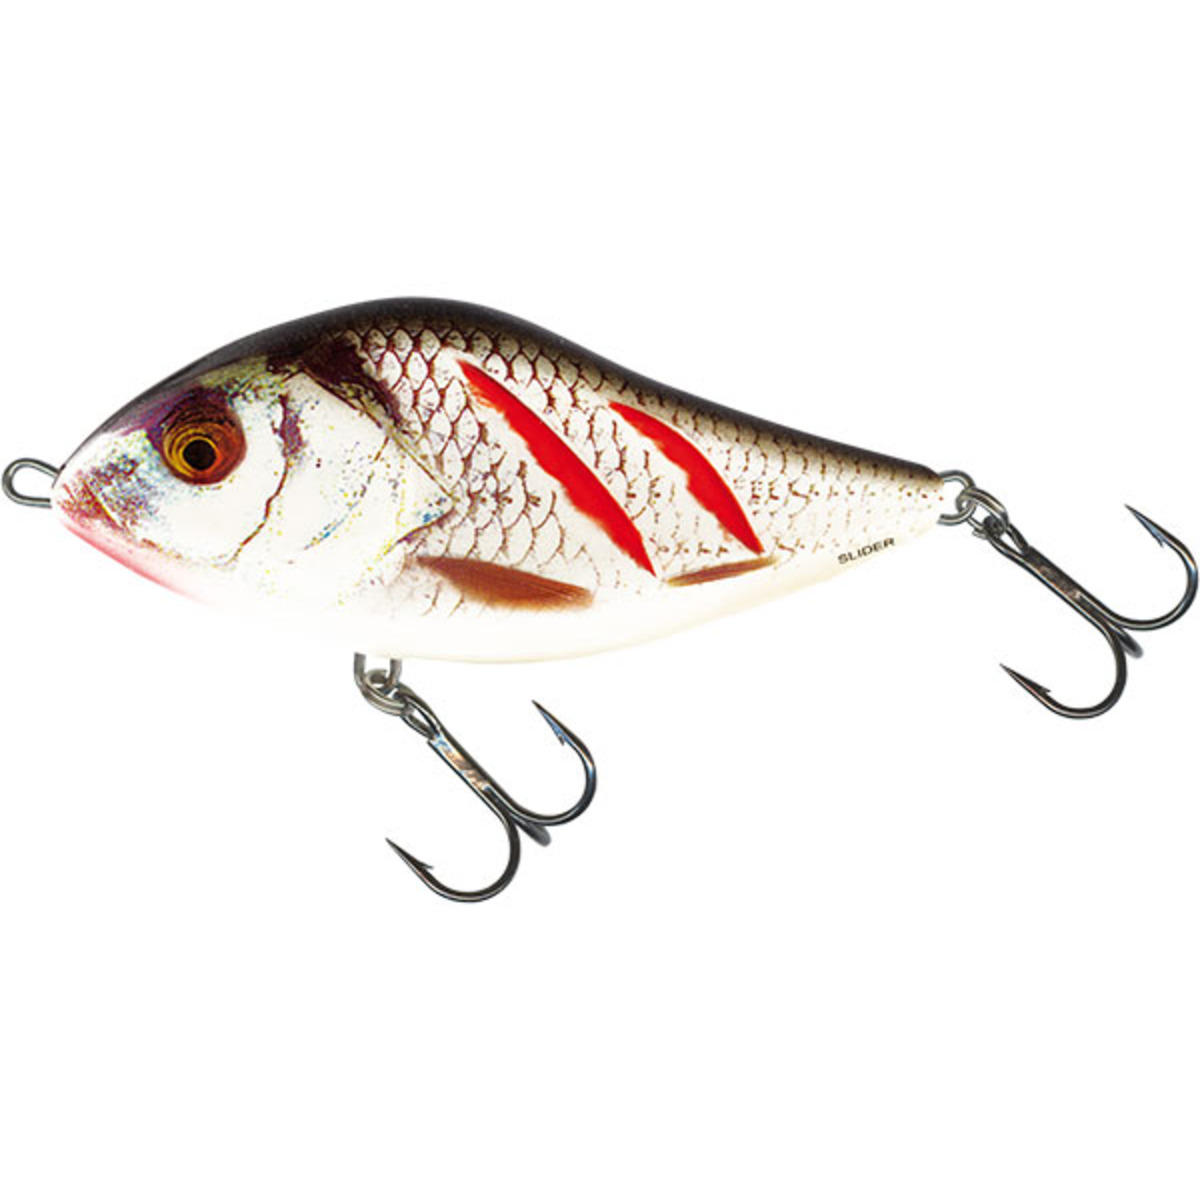 Salmo Slider Sinking - 7 Cm - Wounded Real Grey Shiner